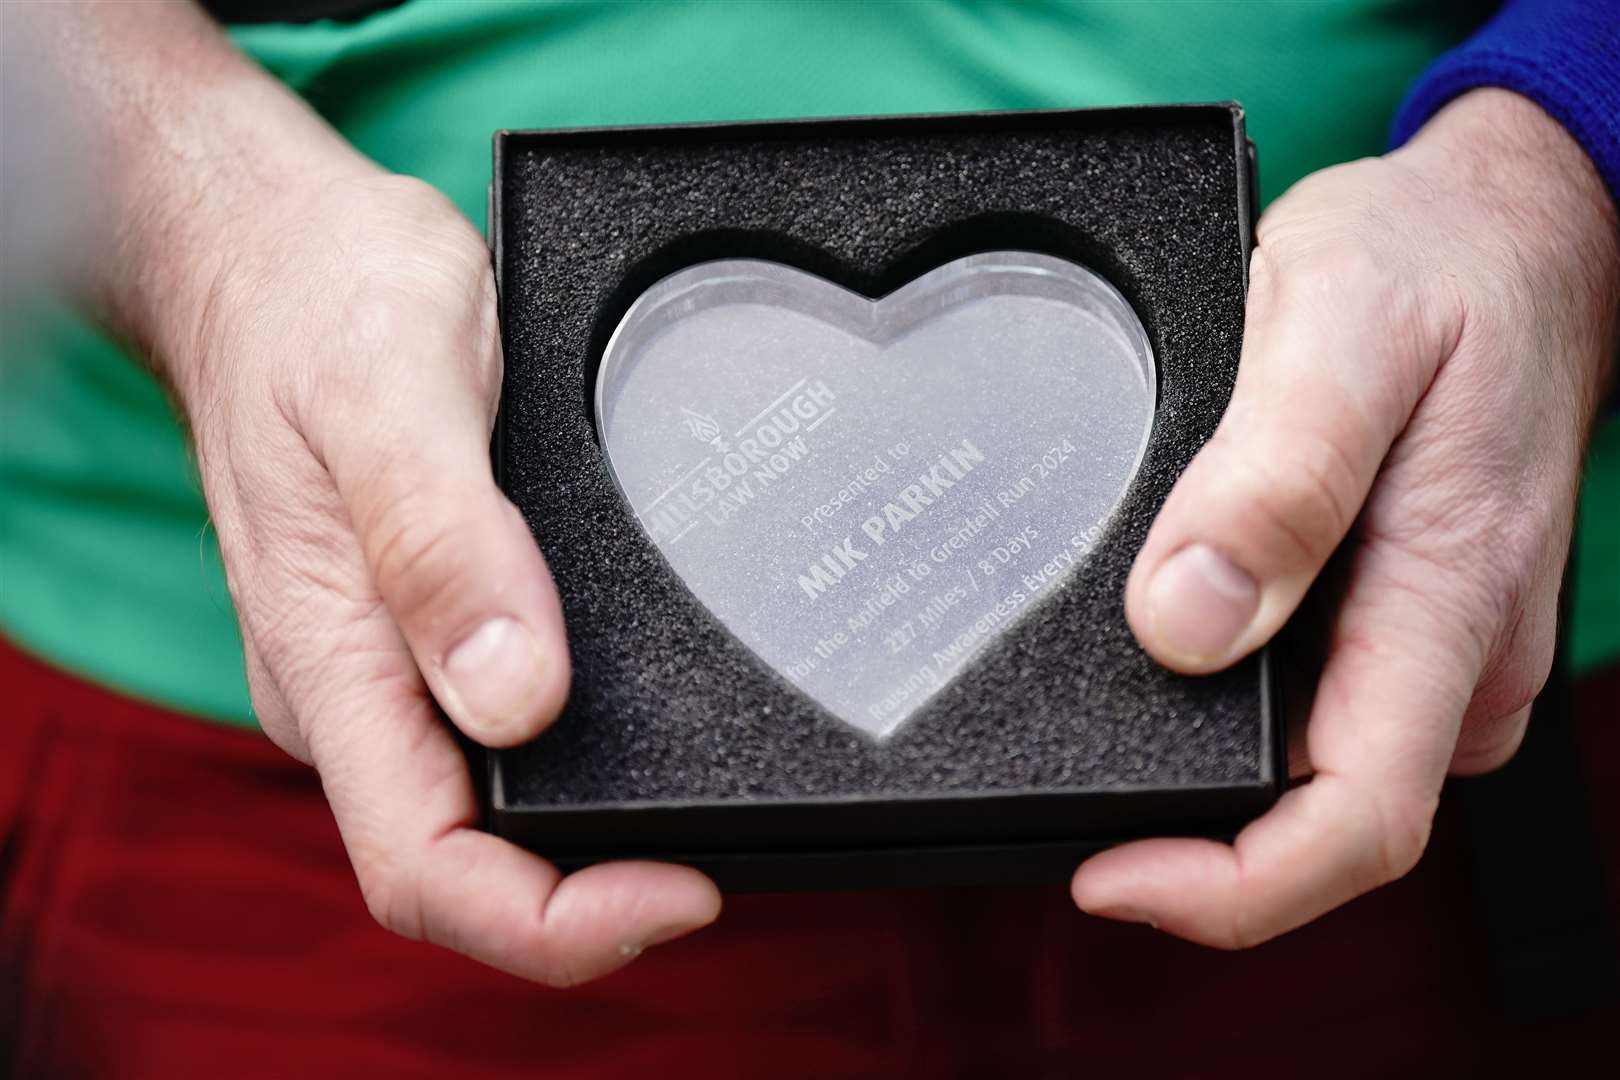 The heart-shaped award given to Mik Parkin (Aaron Chown/PA)